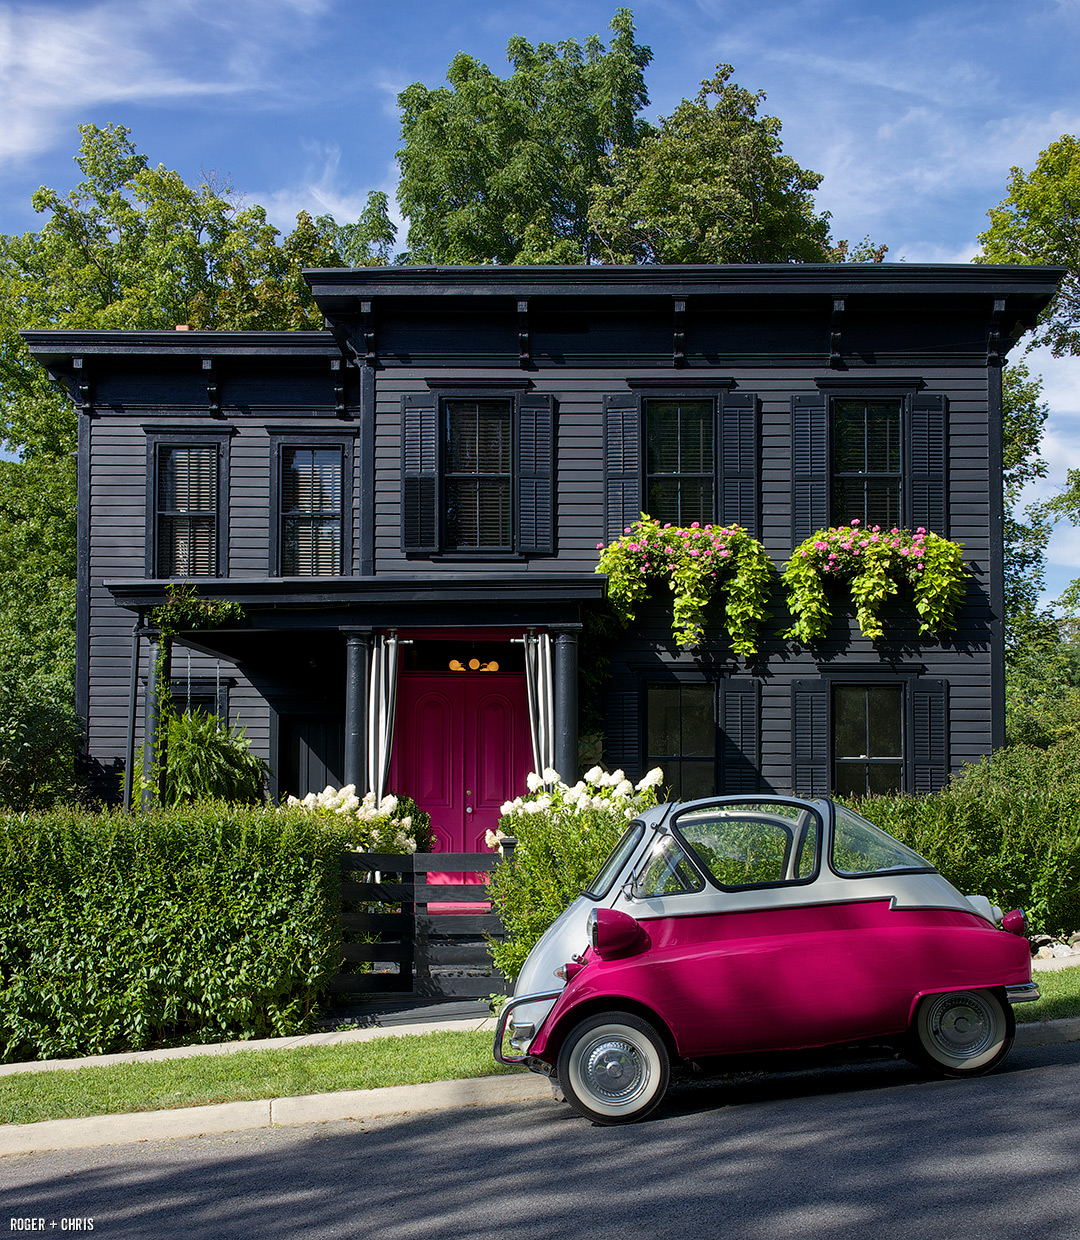 The front of the house with pink doors, window boxes, and a BMW Isetta parked out front.